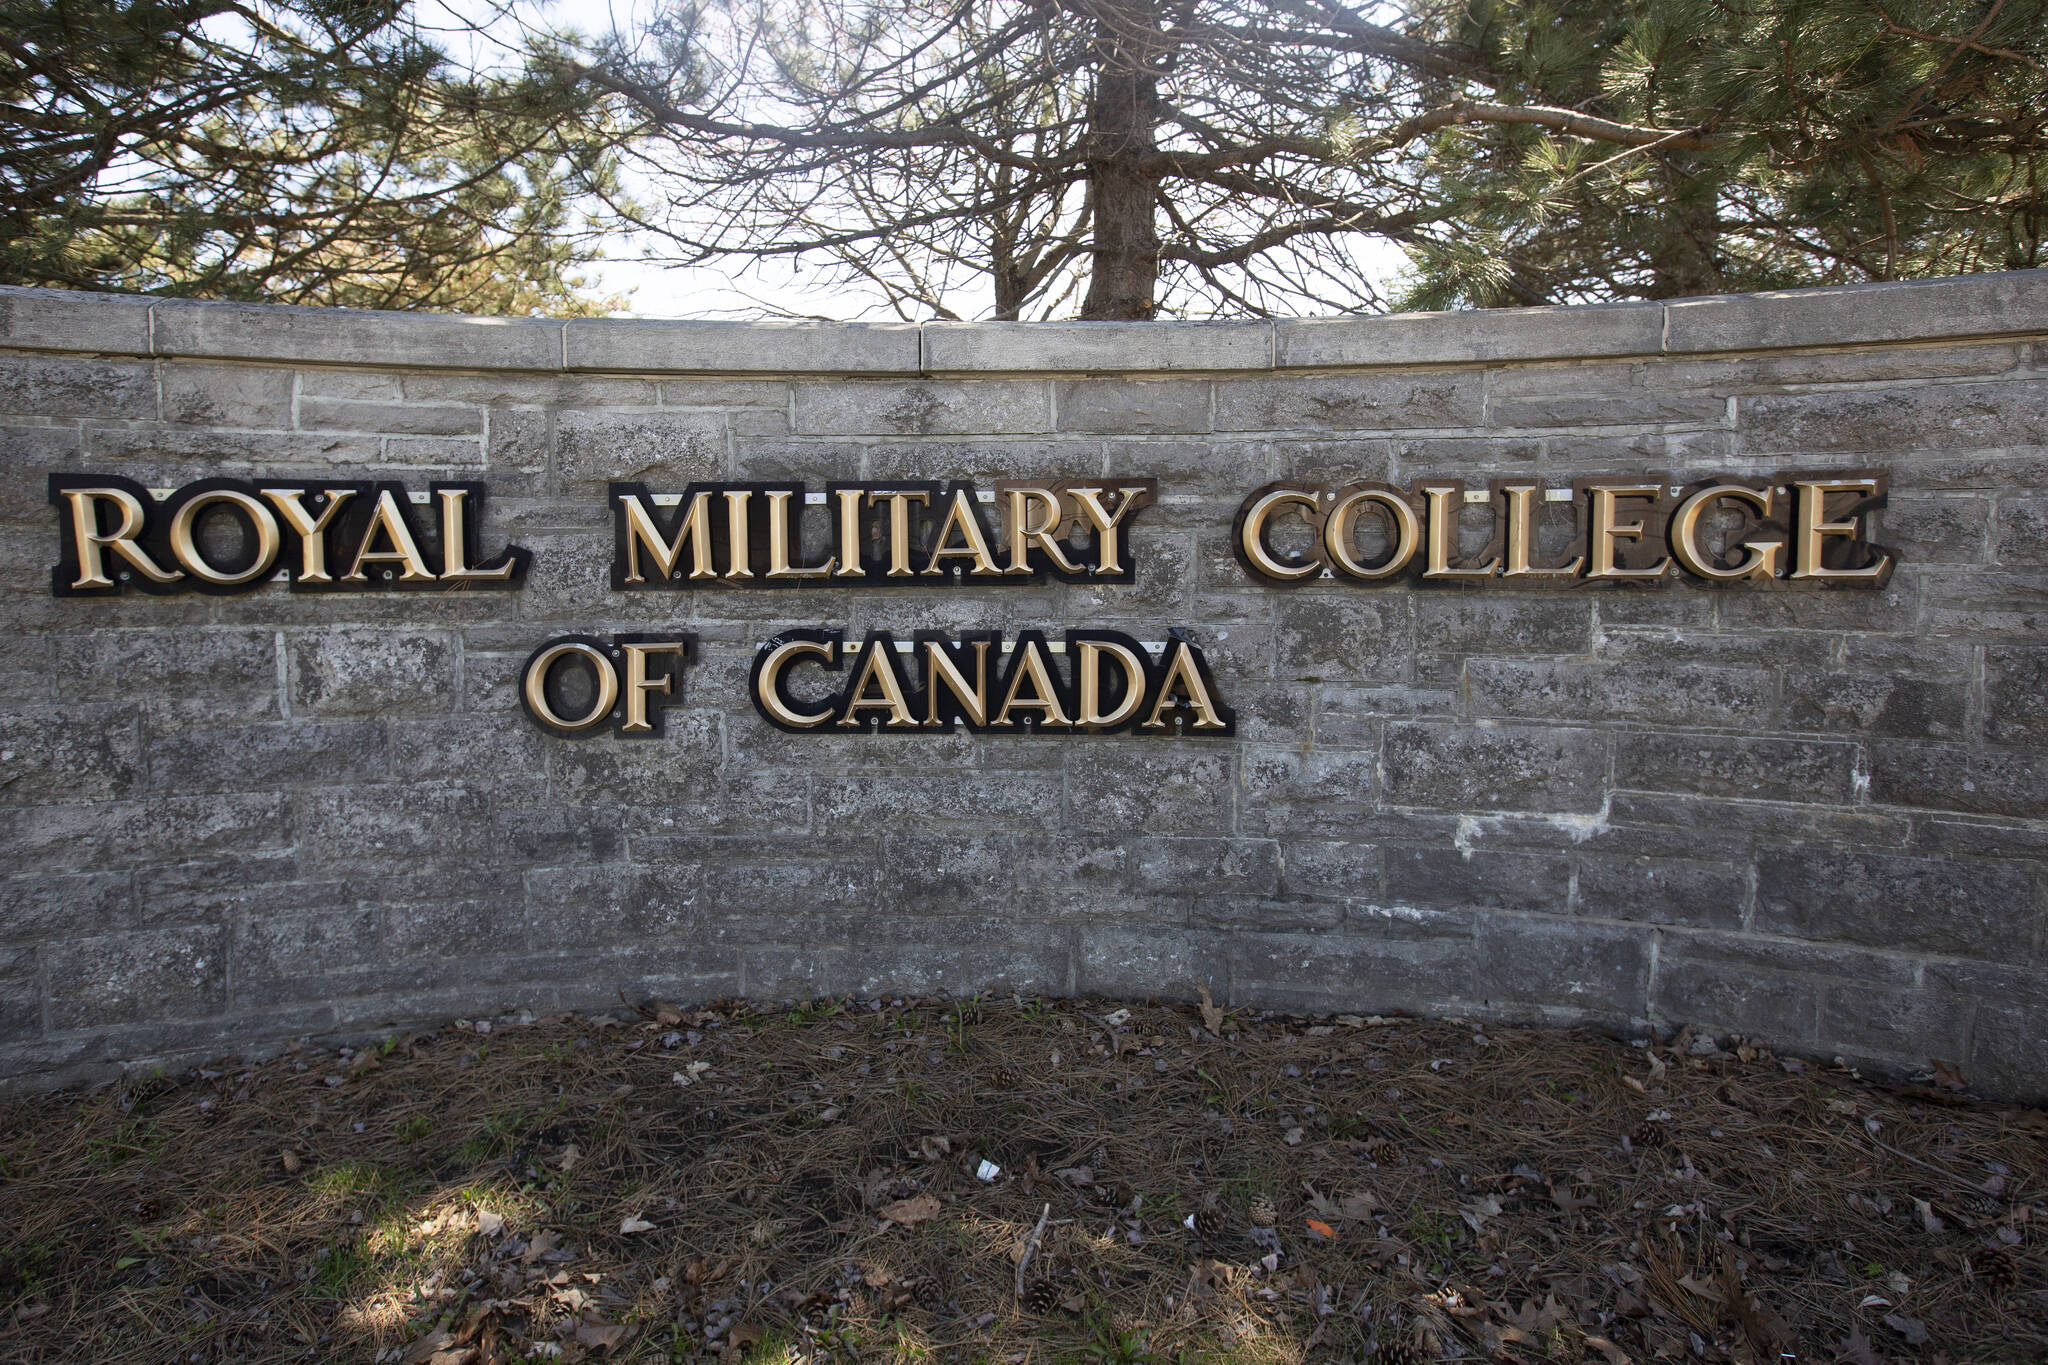 Royal Military College is shown in Kingston, Ontario on Friday April 29, 2022. The Department of National Defence says it’s investigating an incident involving a vehicle at the Royal Military College campus. THE CANADIAN PRESS/Lars Hagberg